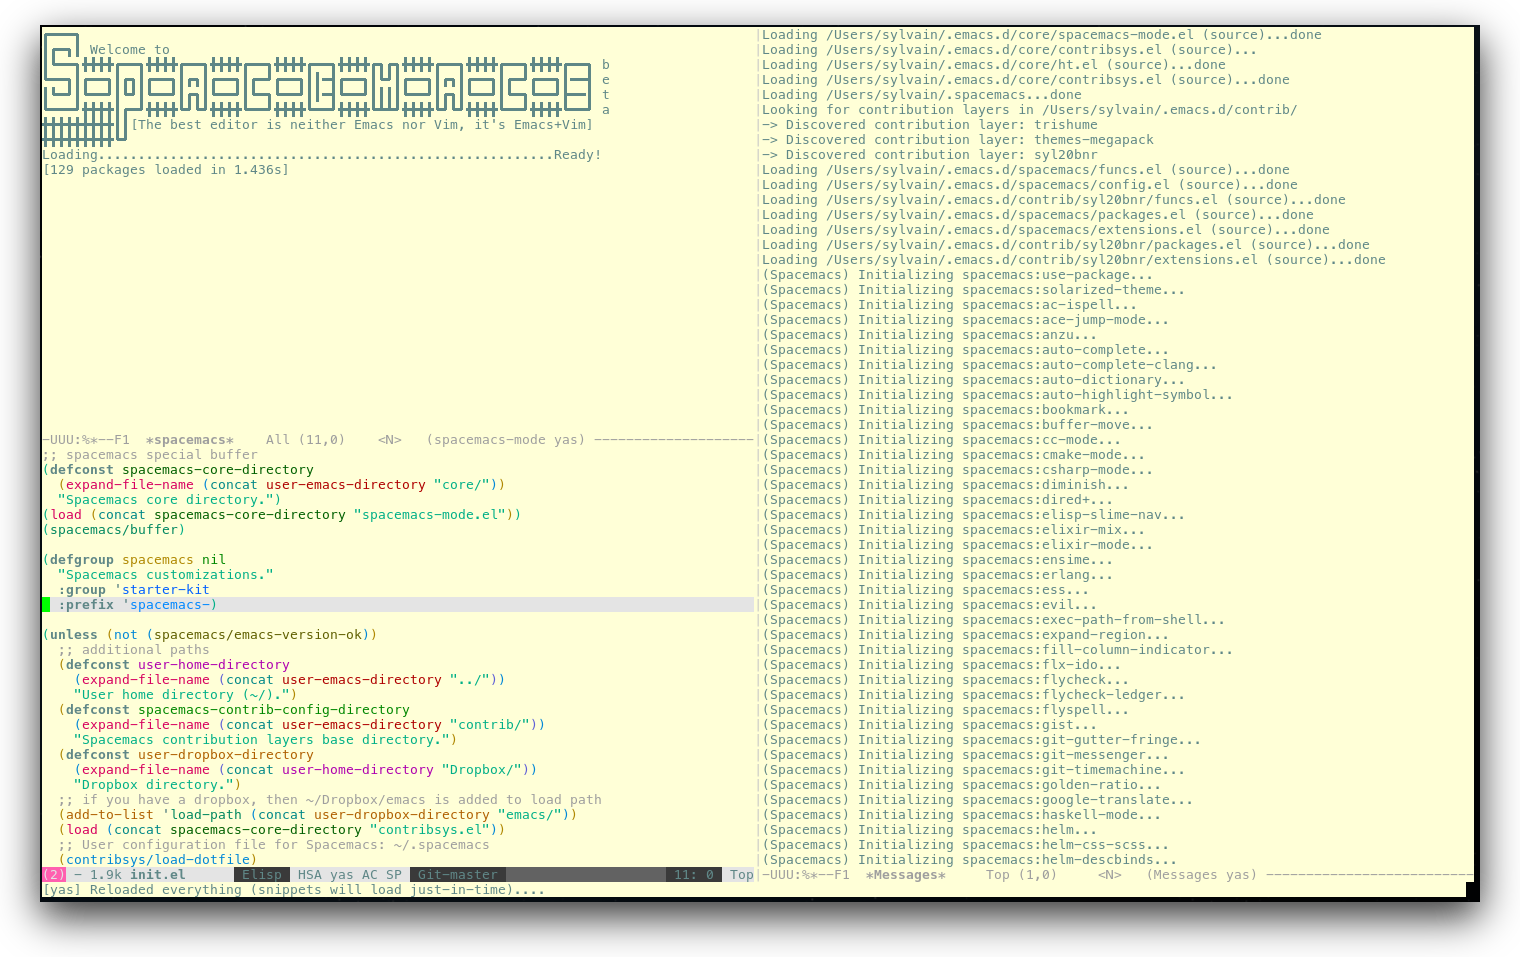 /TakeV/spacemacs/media/commit/b7a24dccac18dca307c93b7d2b1ba66eac816fce/doc/img/spacemacs-urxvt.png